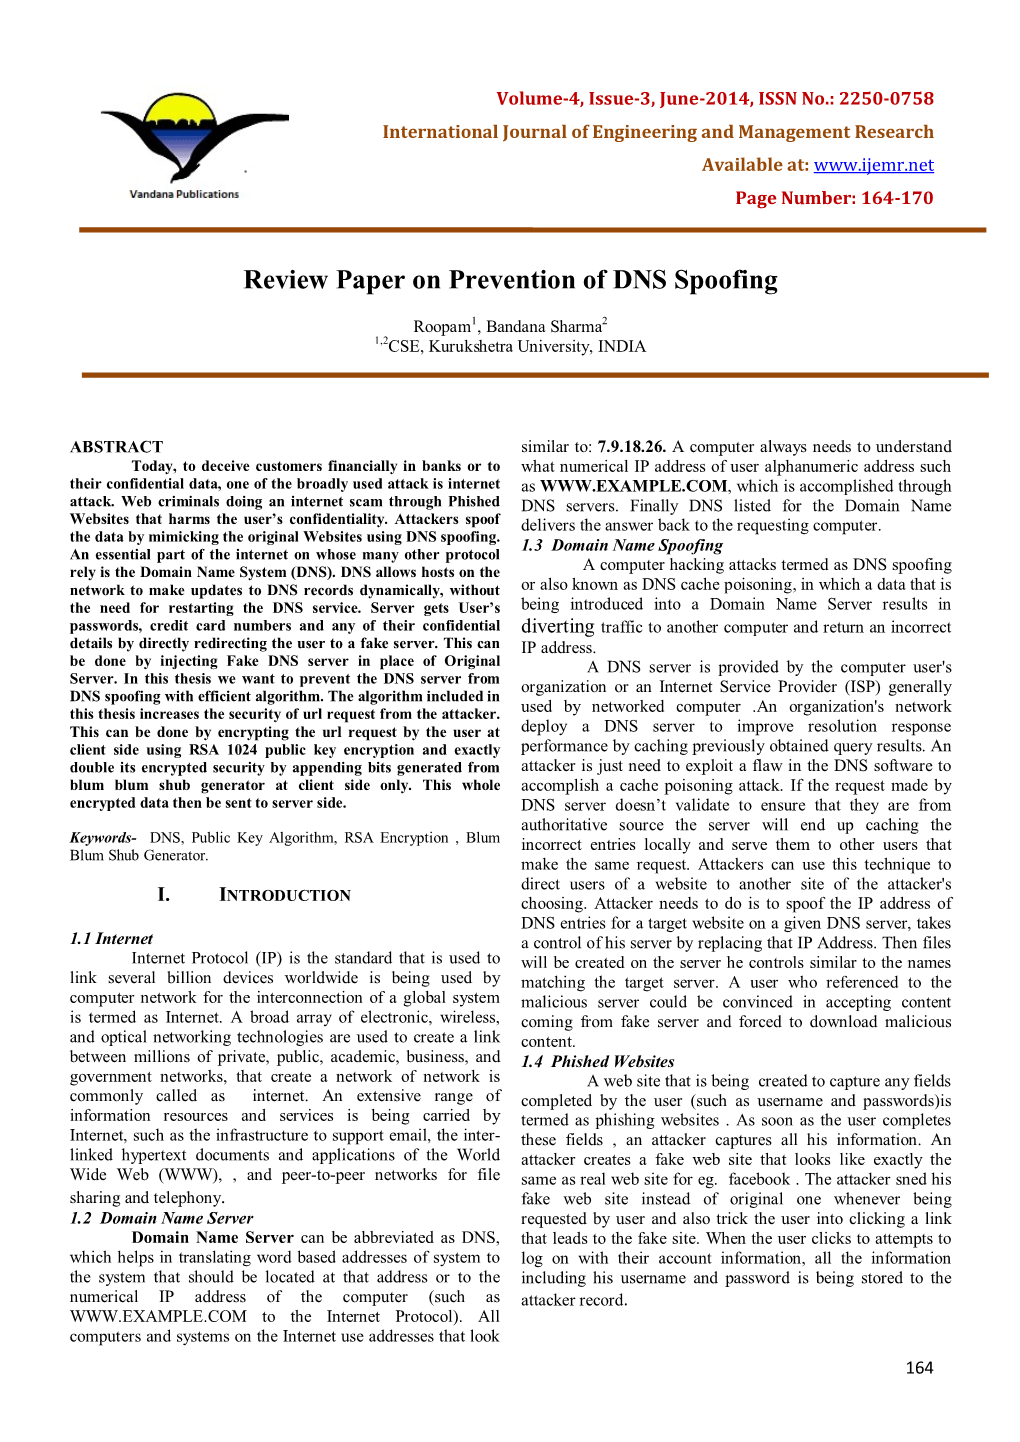 Review Paper on Prevention of DNS Spoofing